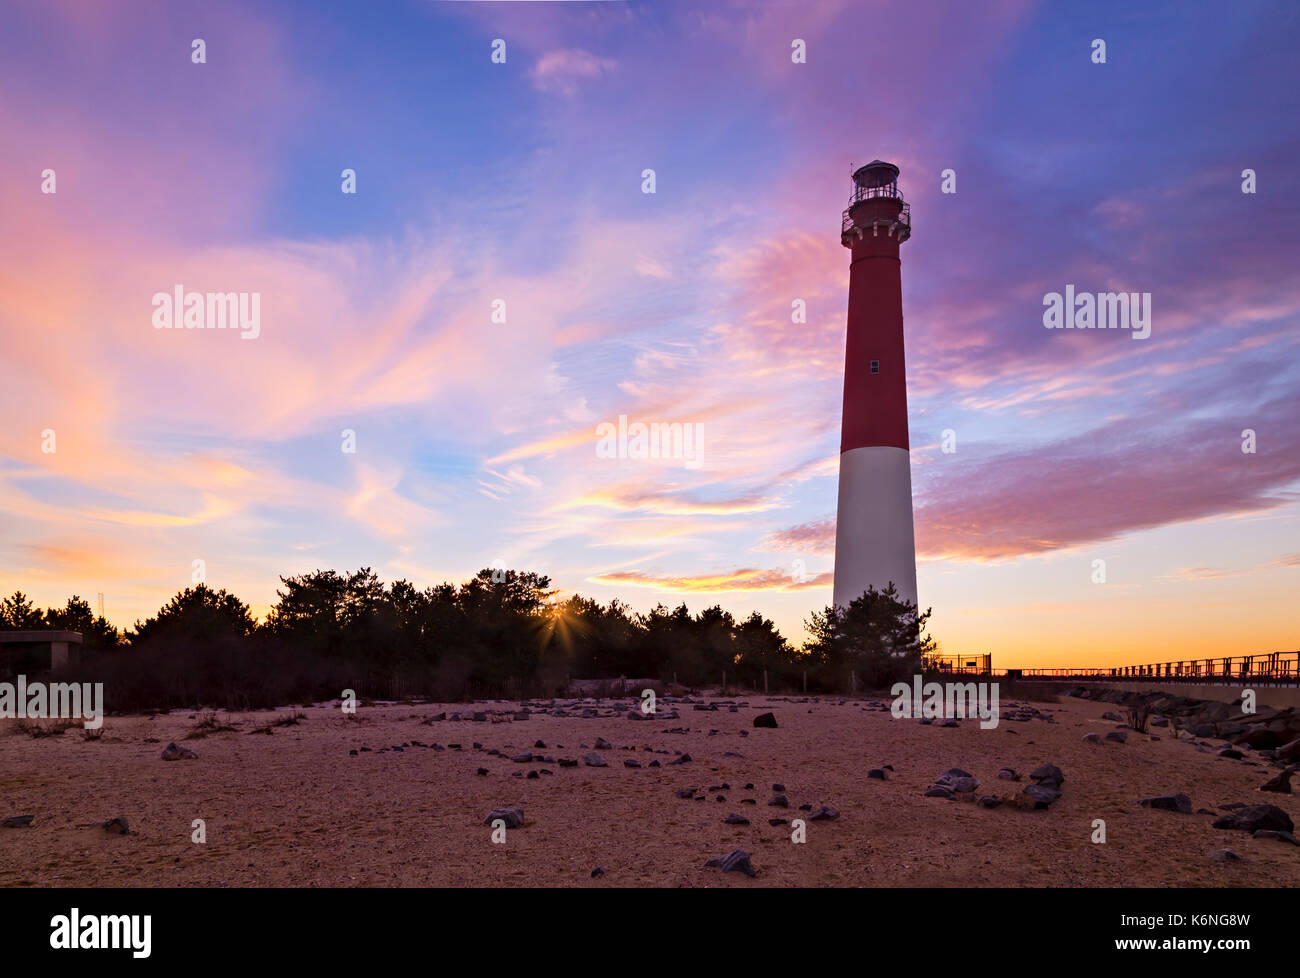 Barnegat Bay Light Sunset - Barnegat Lighthouse or Barnegat Light, colloquially known as 'Old Barney', is a historic lighthouse located in Barnegat Lighthouse State Park on the northern tip of Long Beach Island (LBI), in  Ocean County, New Jersey. Stock Photo